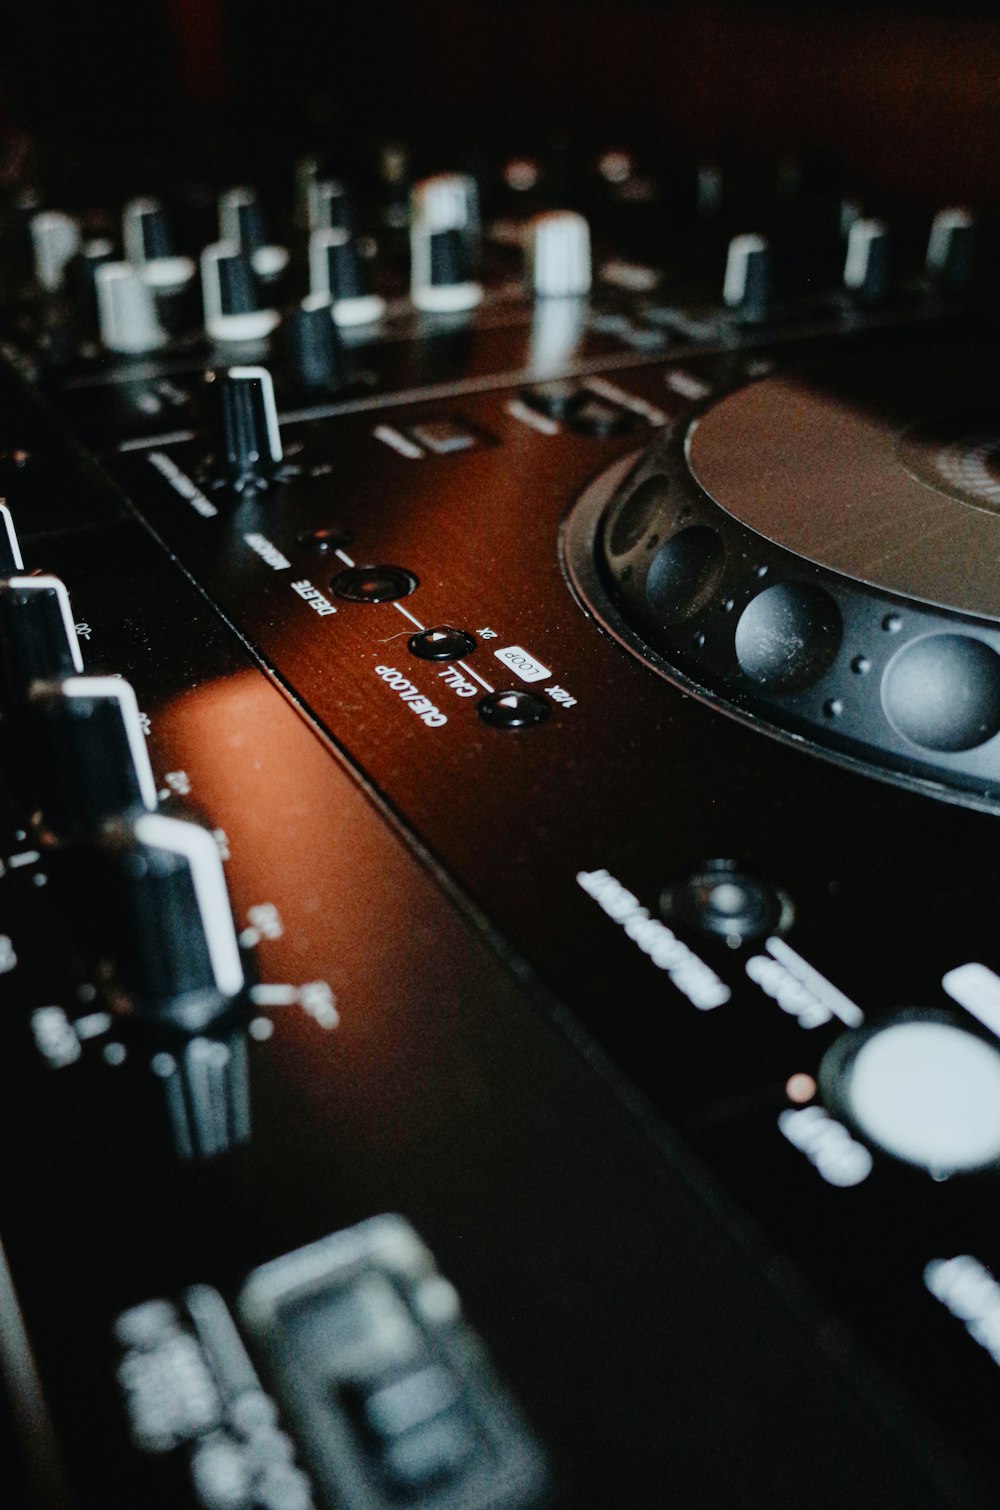 a close up of a dj mixing console